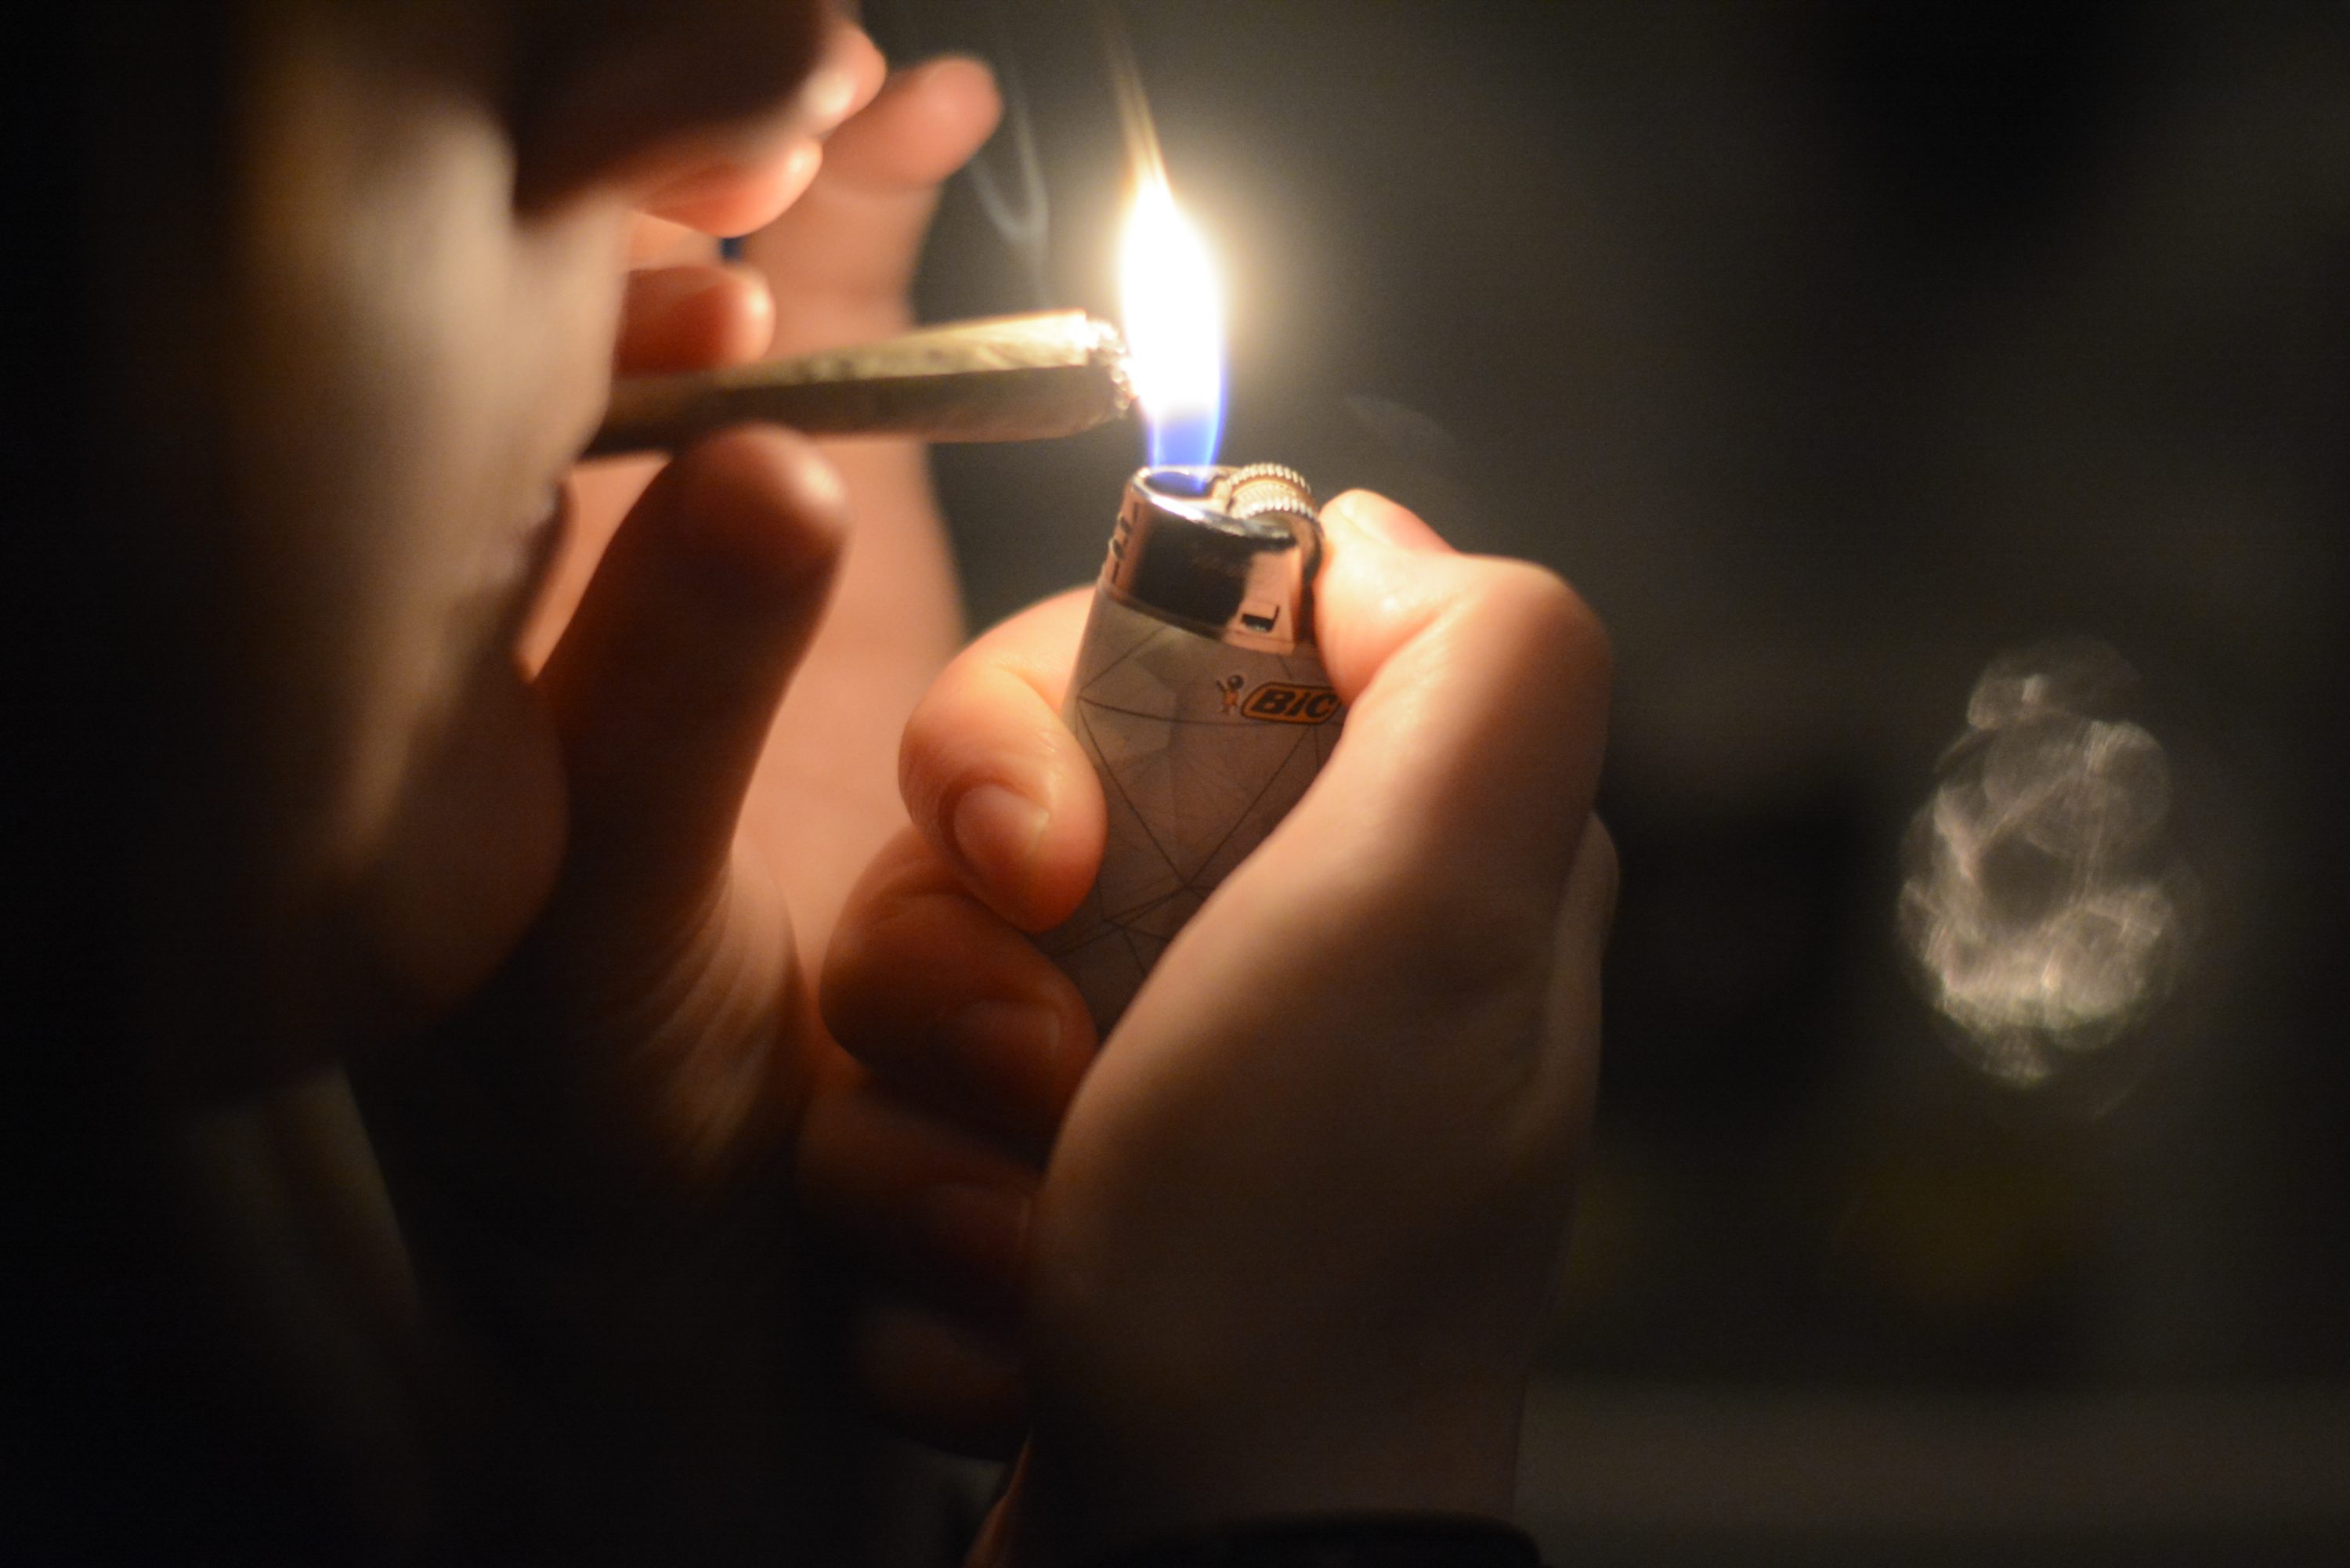 A Syracuse student lights a marijuana cigarette in their apartment.